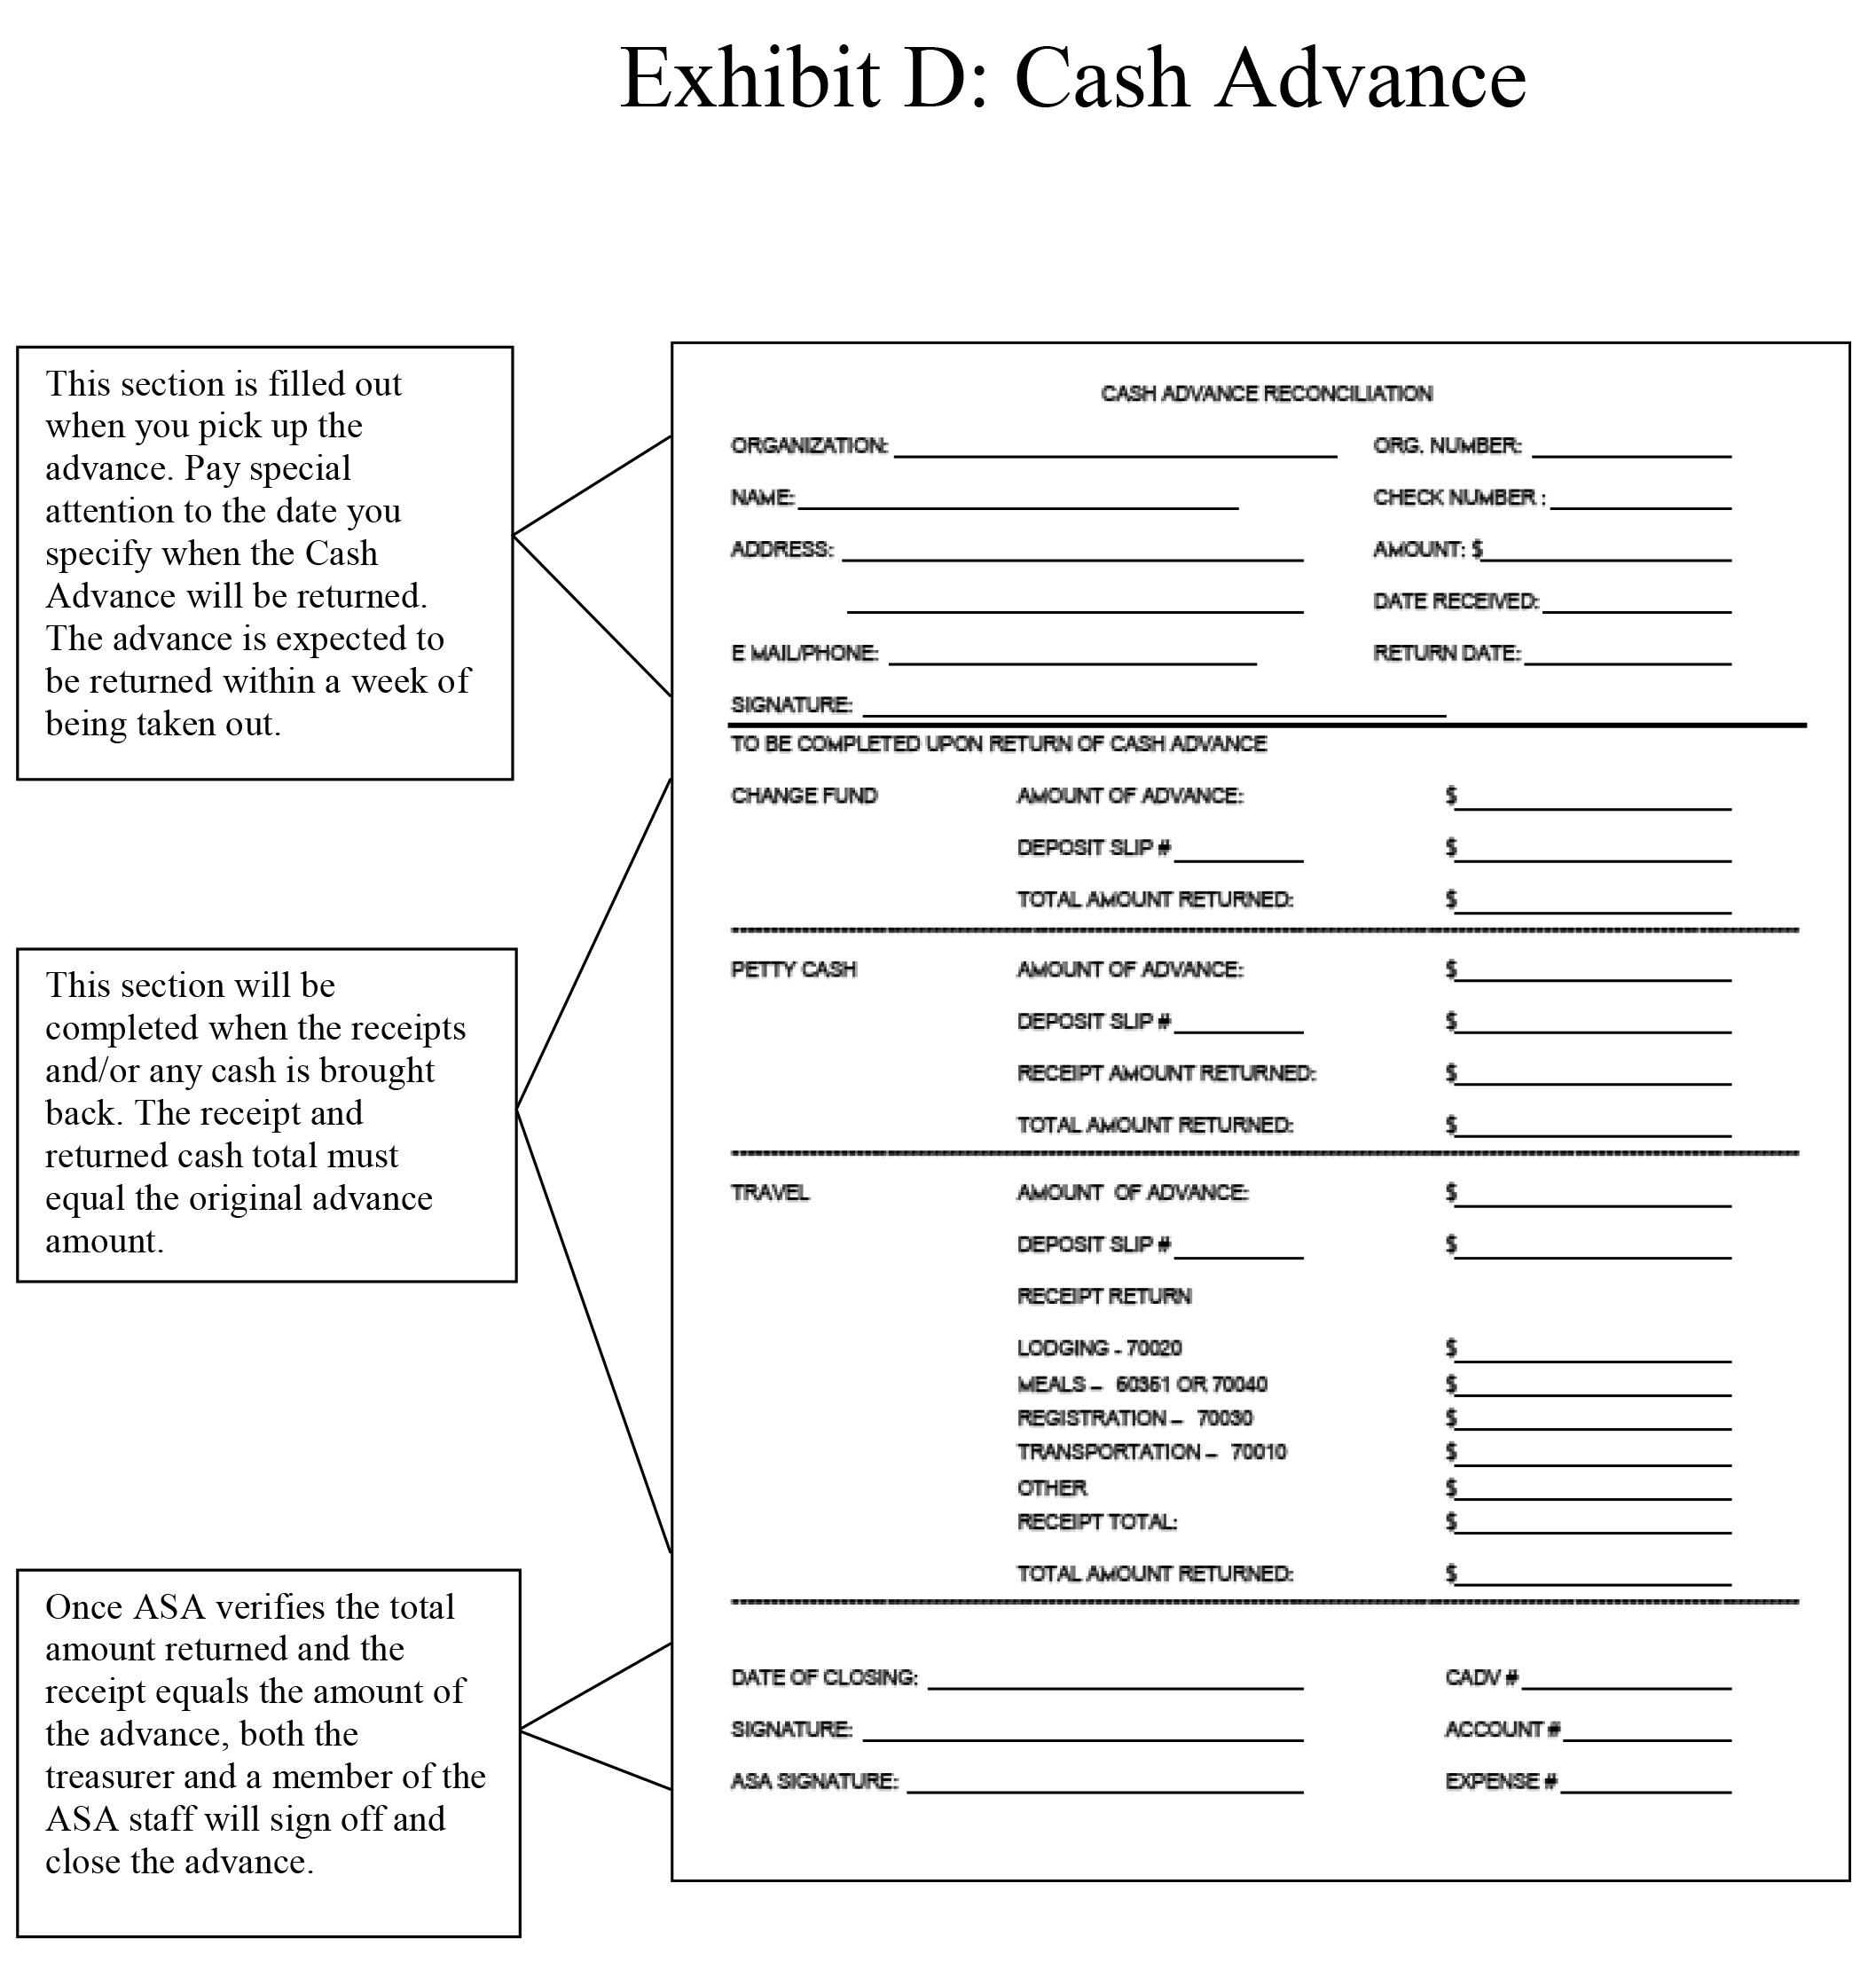 Example of how to complete a cash advance